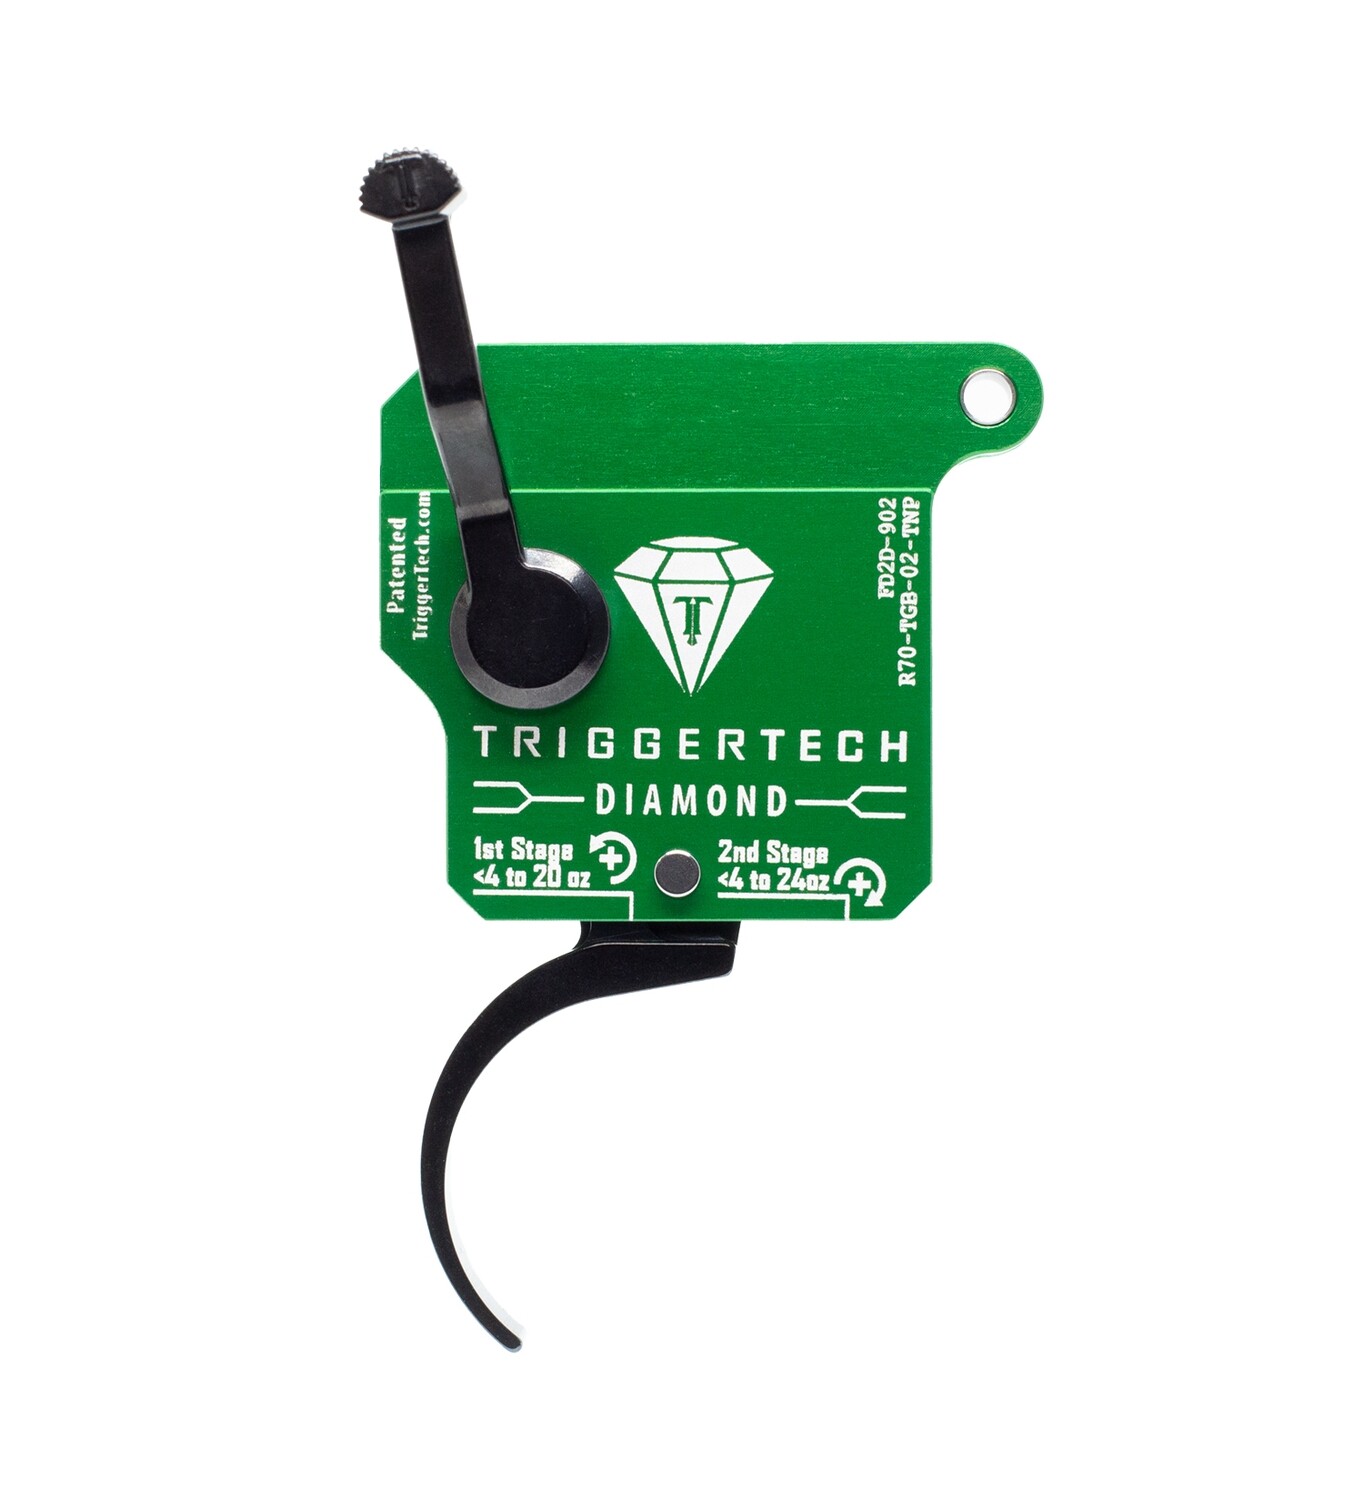 TriggerTech Diamond Two Stage Curved Right Hand for 700 Footprint Actions